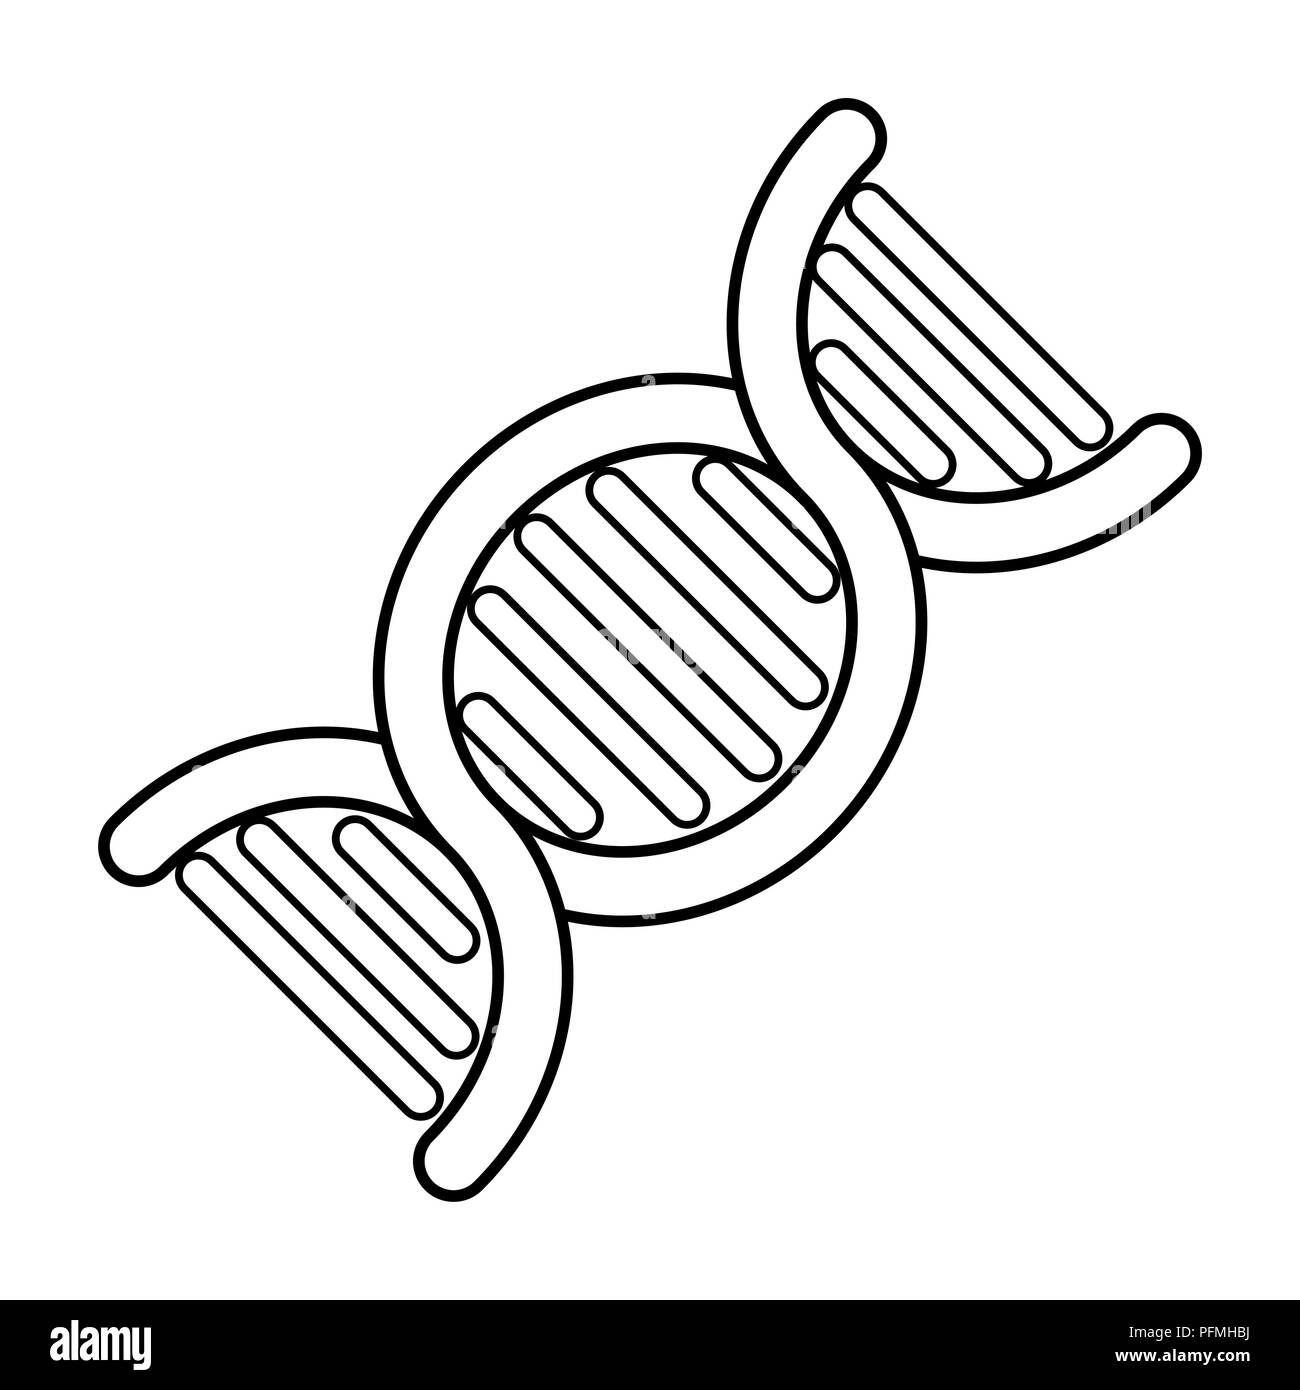 Dna Molecule Black And White Stock Photos Images Alamy